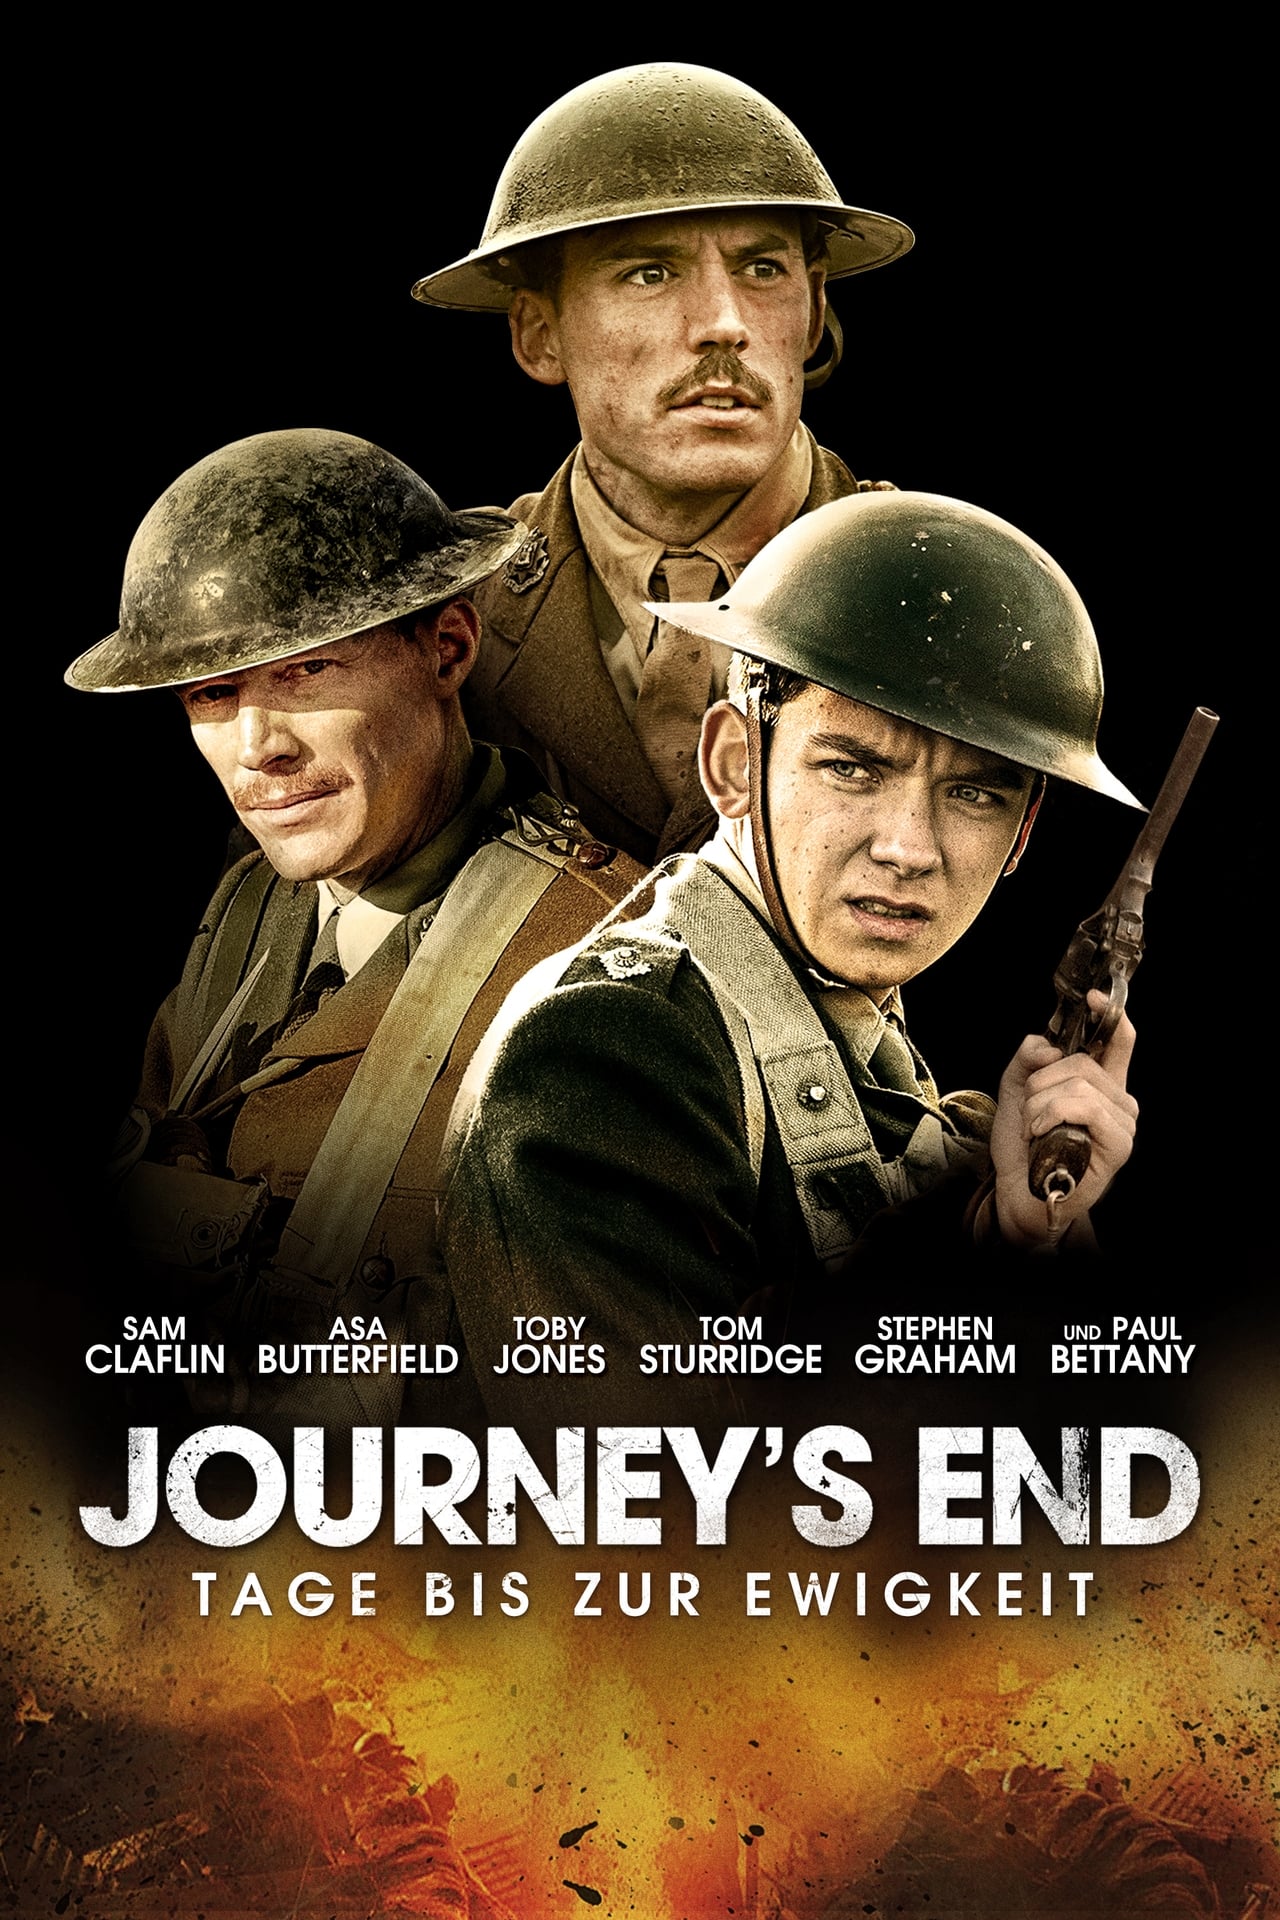 journey's end video